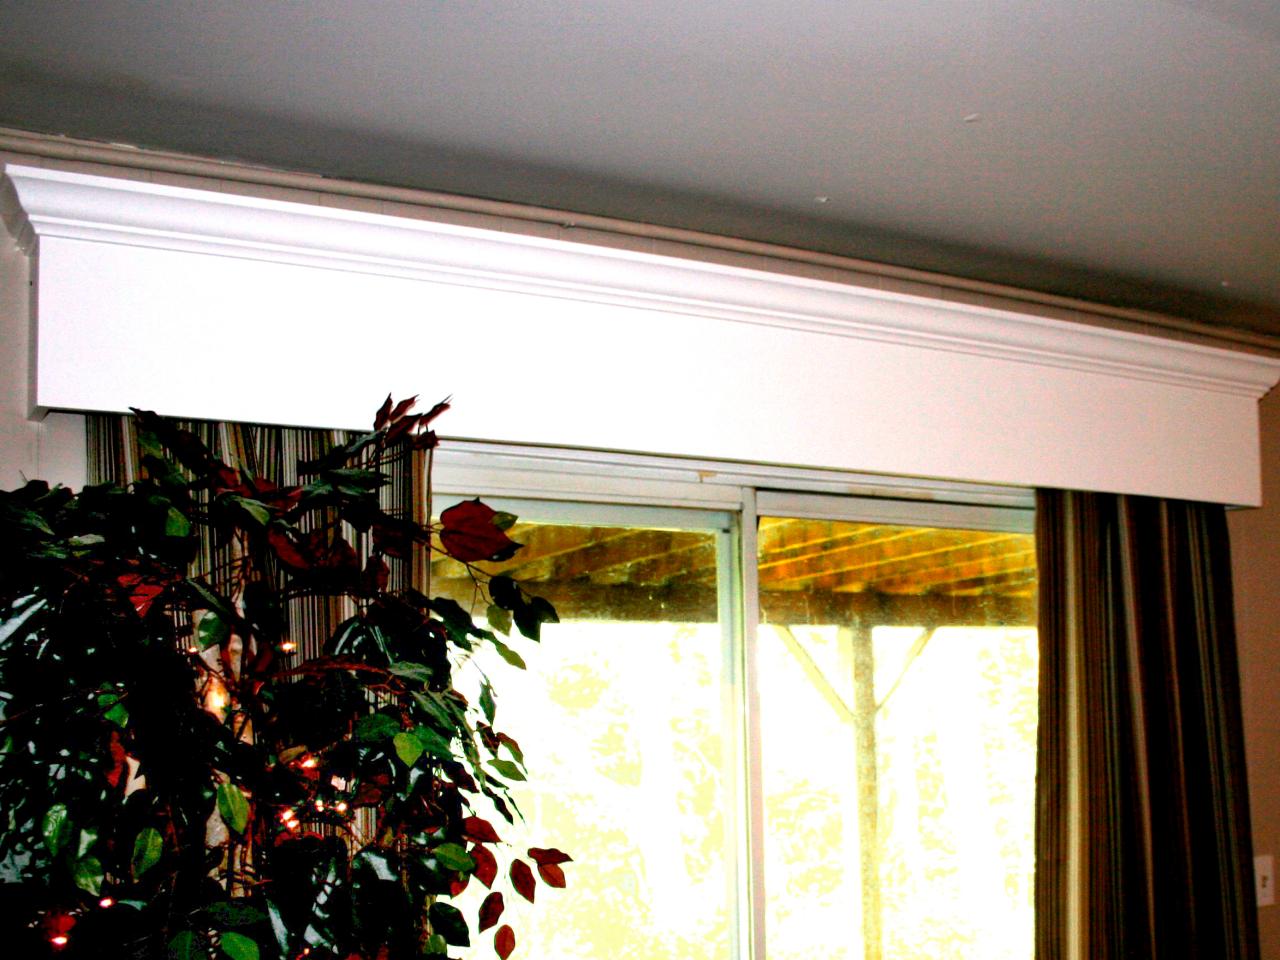 How to Build a Wooden Window Valance | Window Treatments - Ideas for 